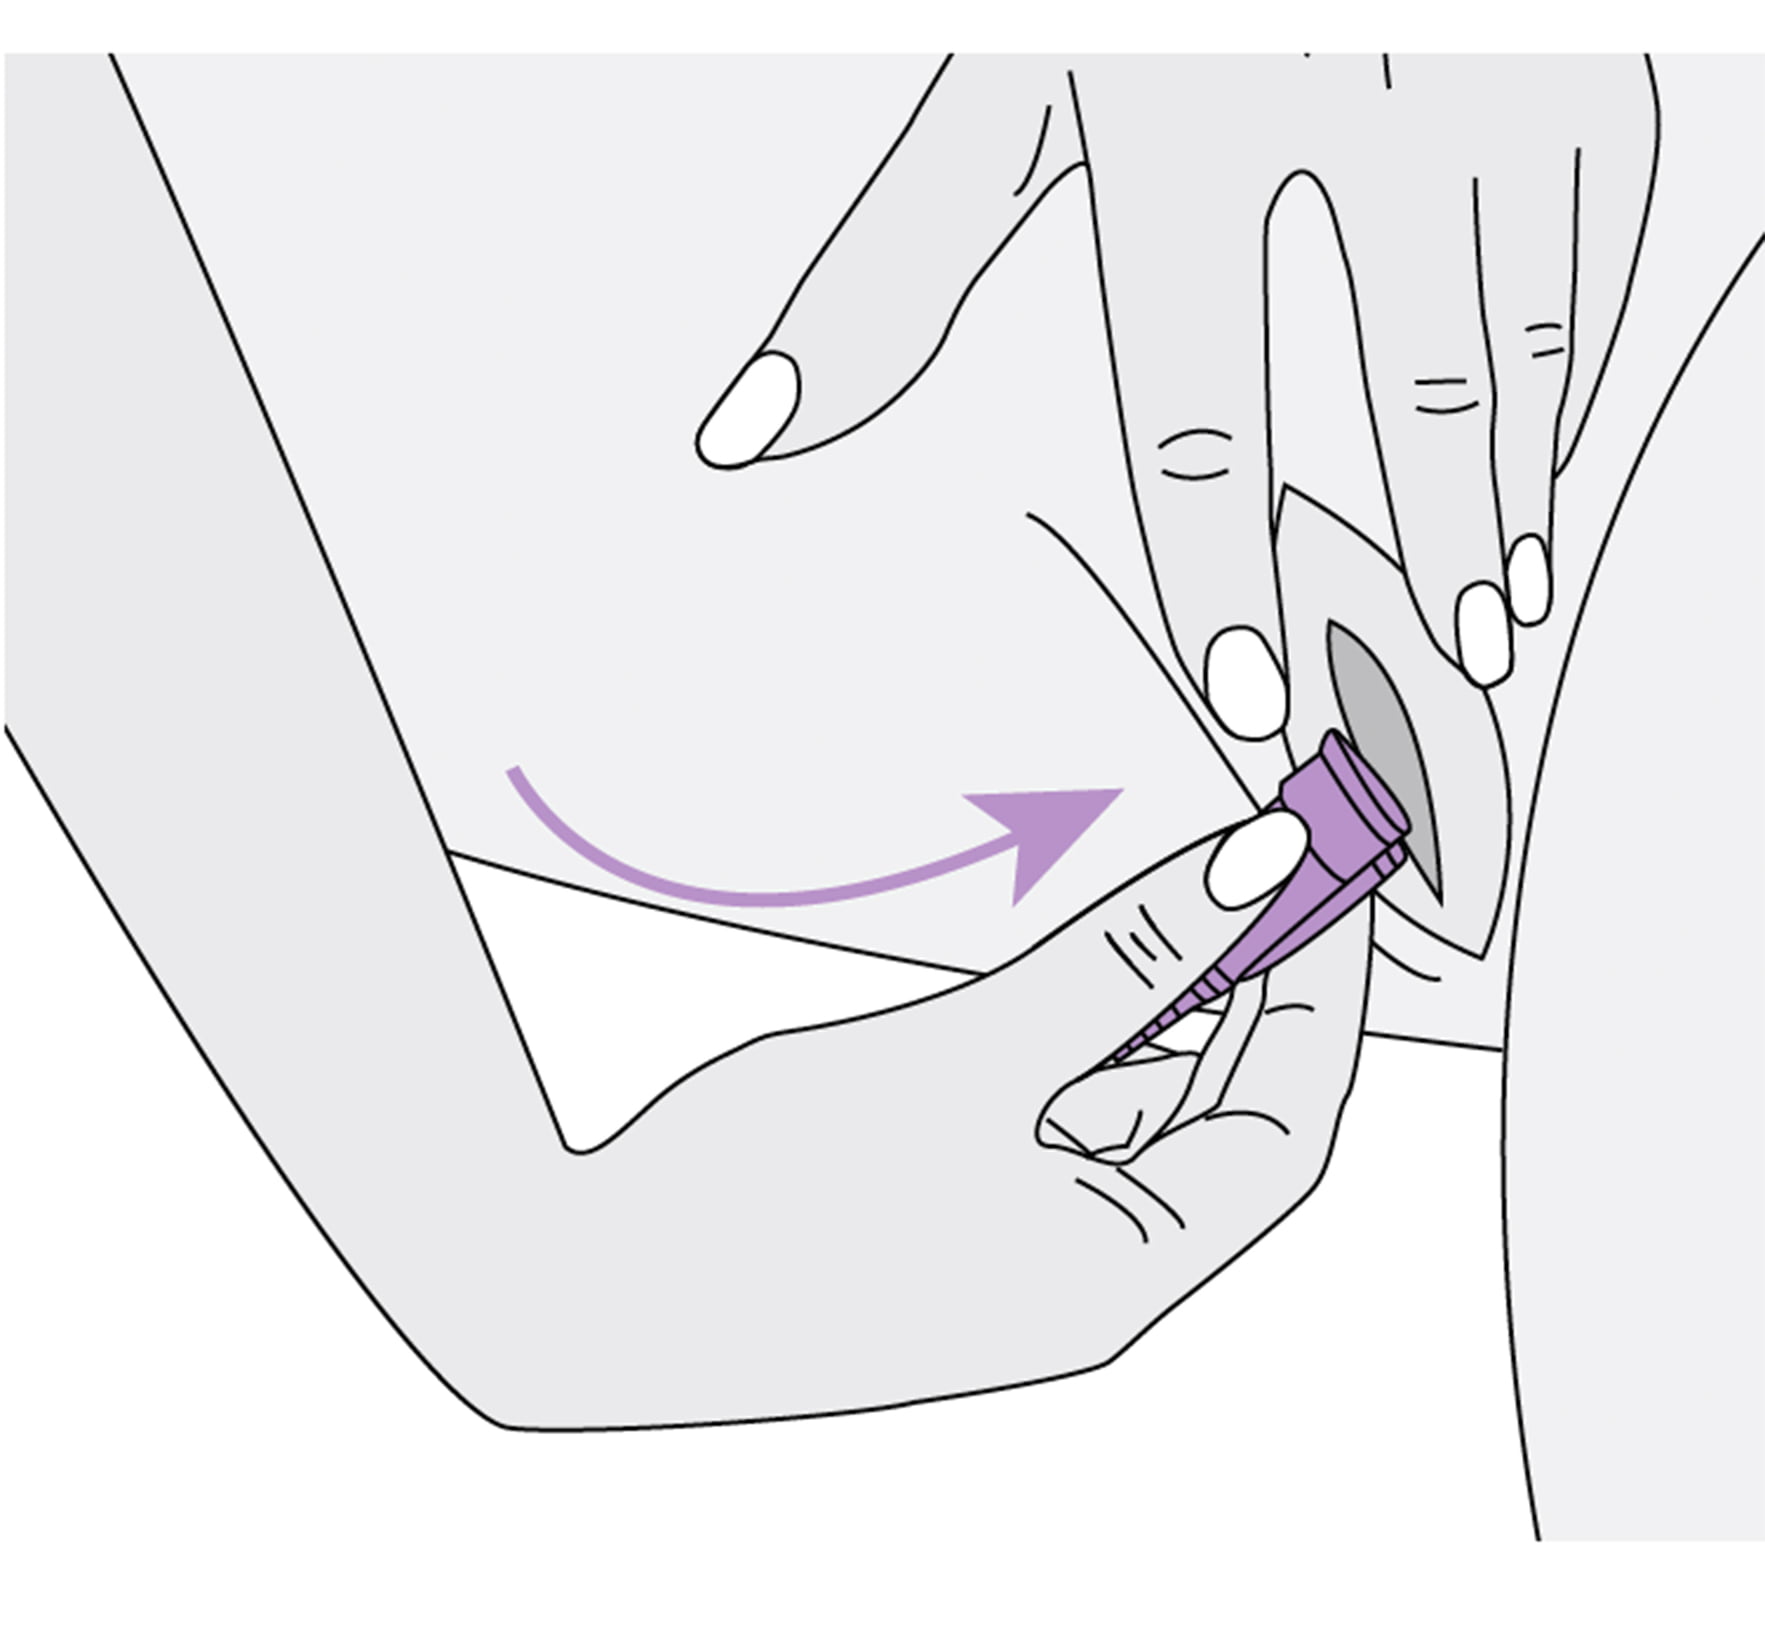 Inserting-menstrual-cup